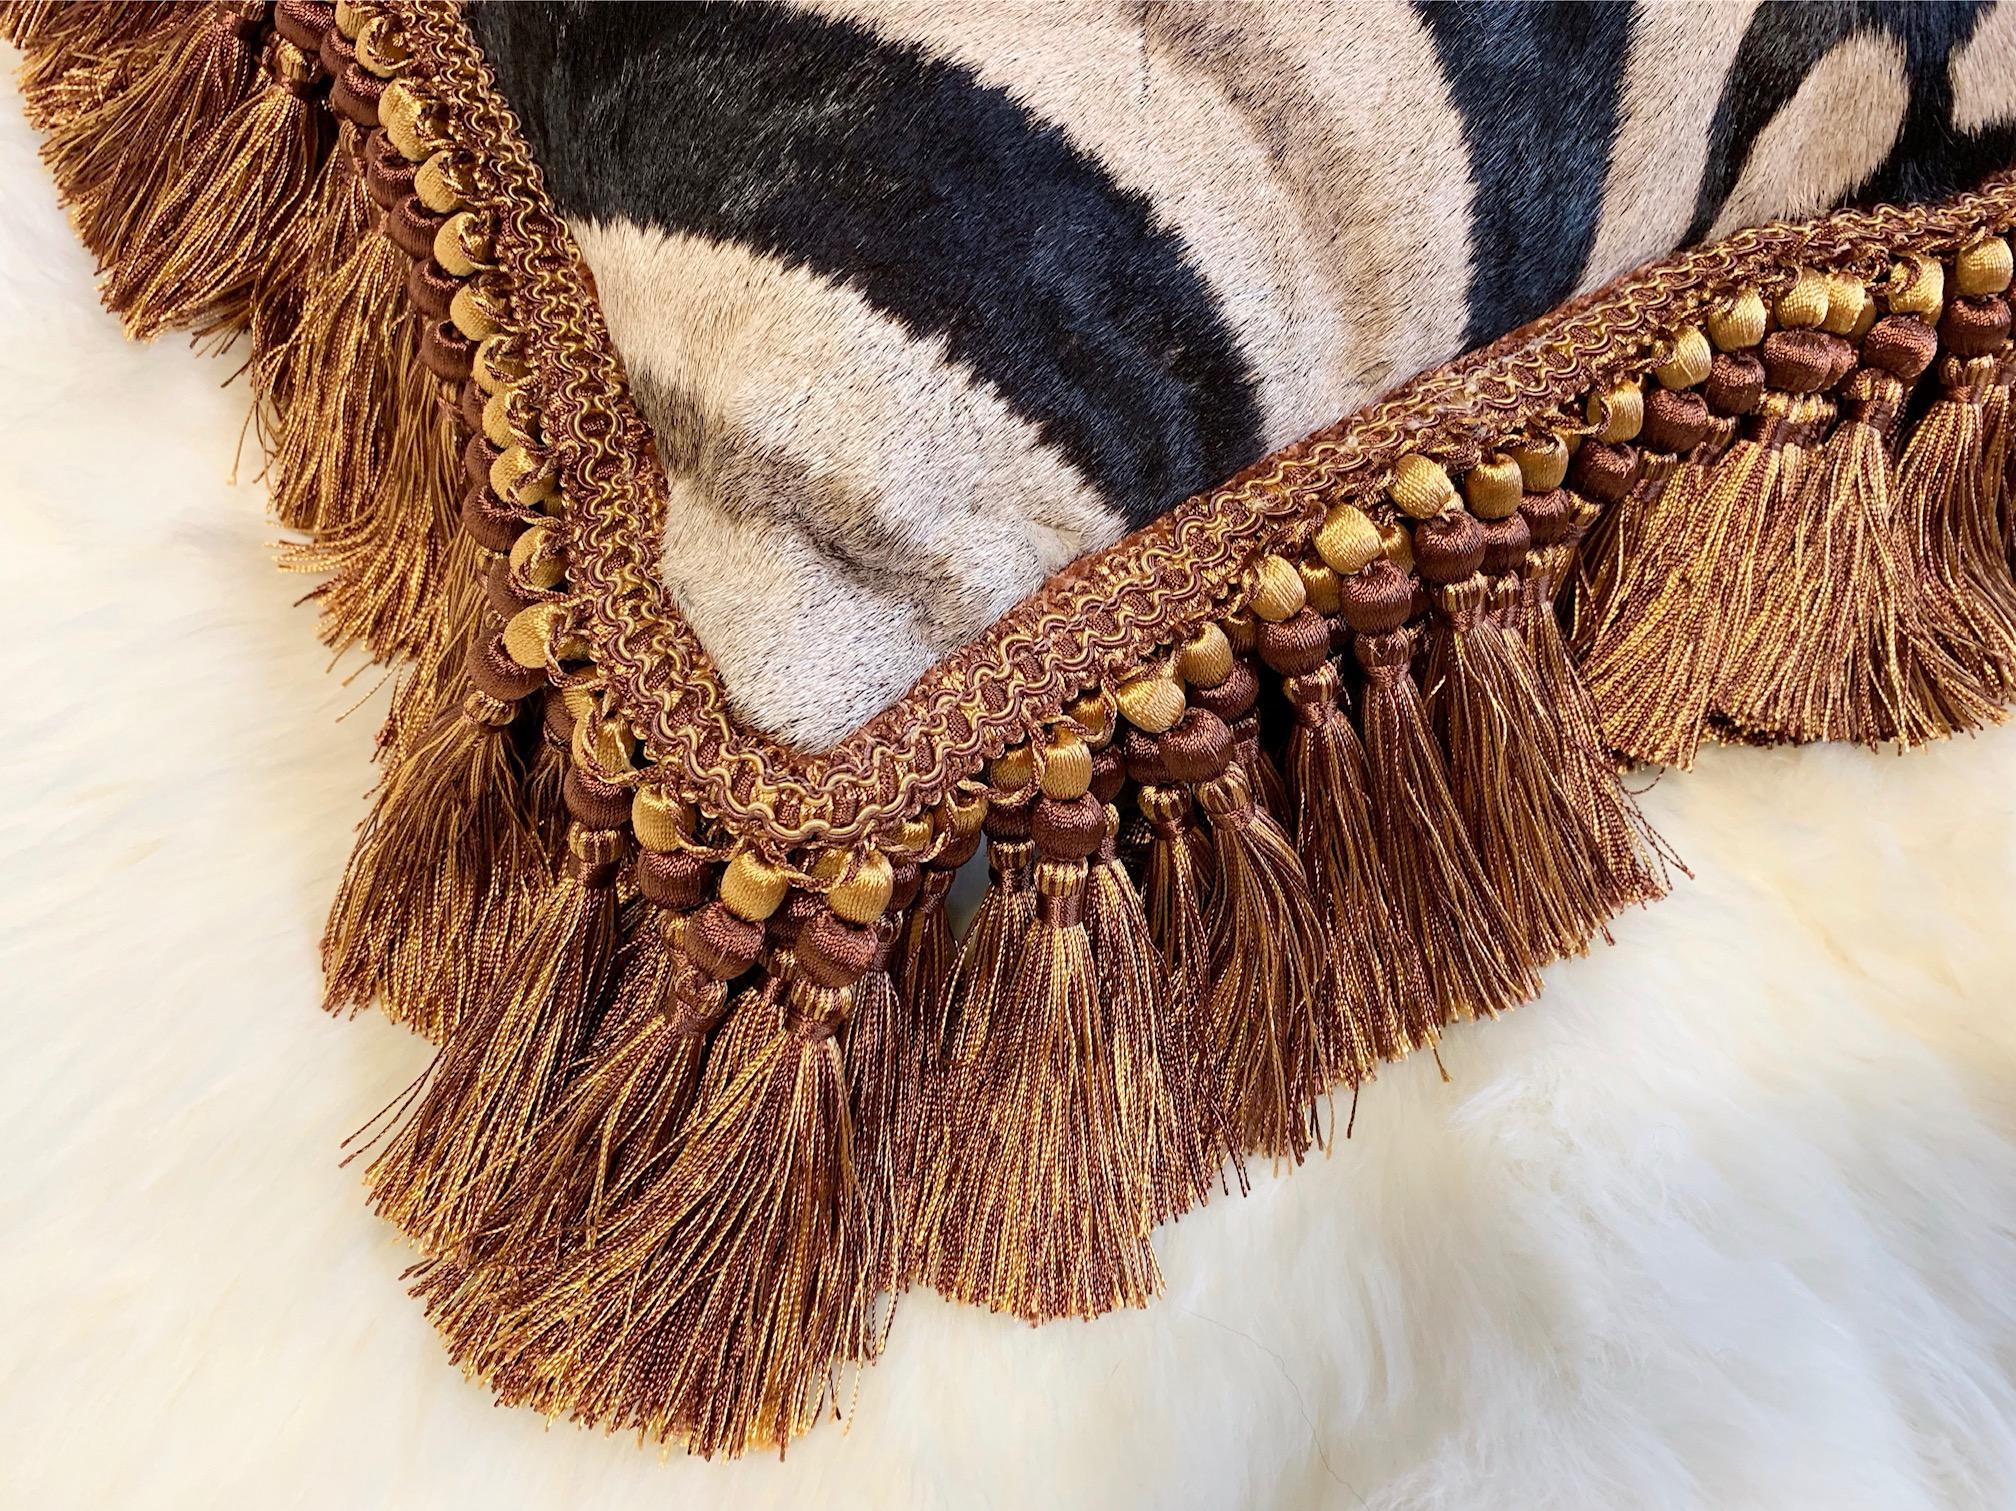 Forsyth zebra hide pillows are simply the best. The most beautiful hides are selected, handcut, handstitched, and hand stuffed with the finest goose down. Each step is meticulously curated by Saint Louis based Forsyth artisans. This copper fringe